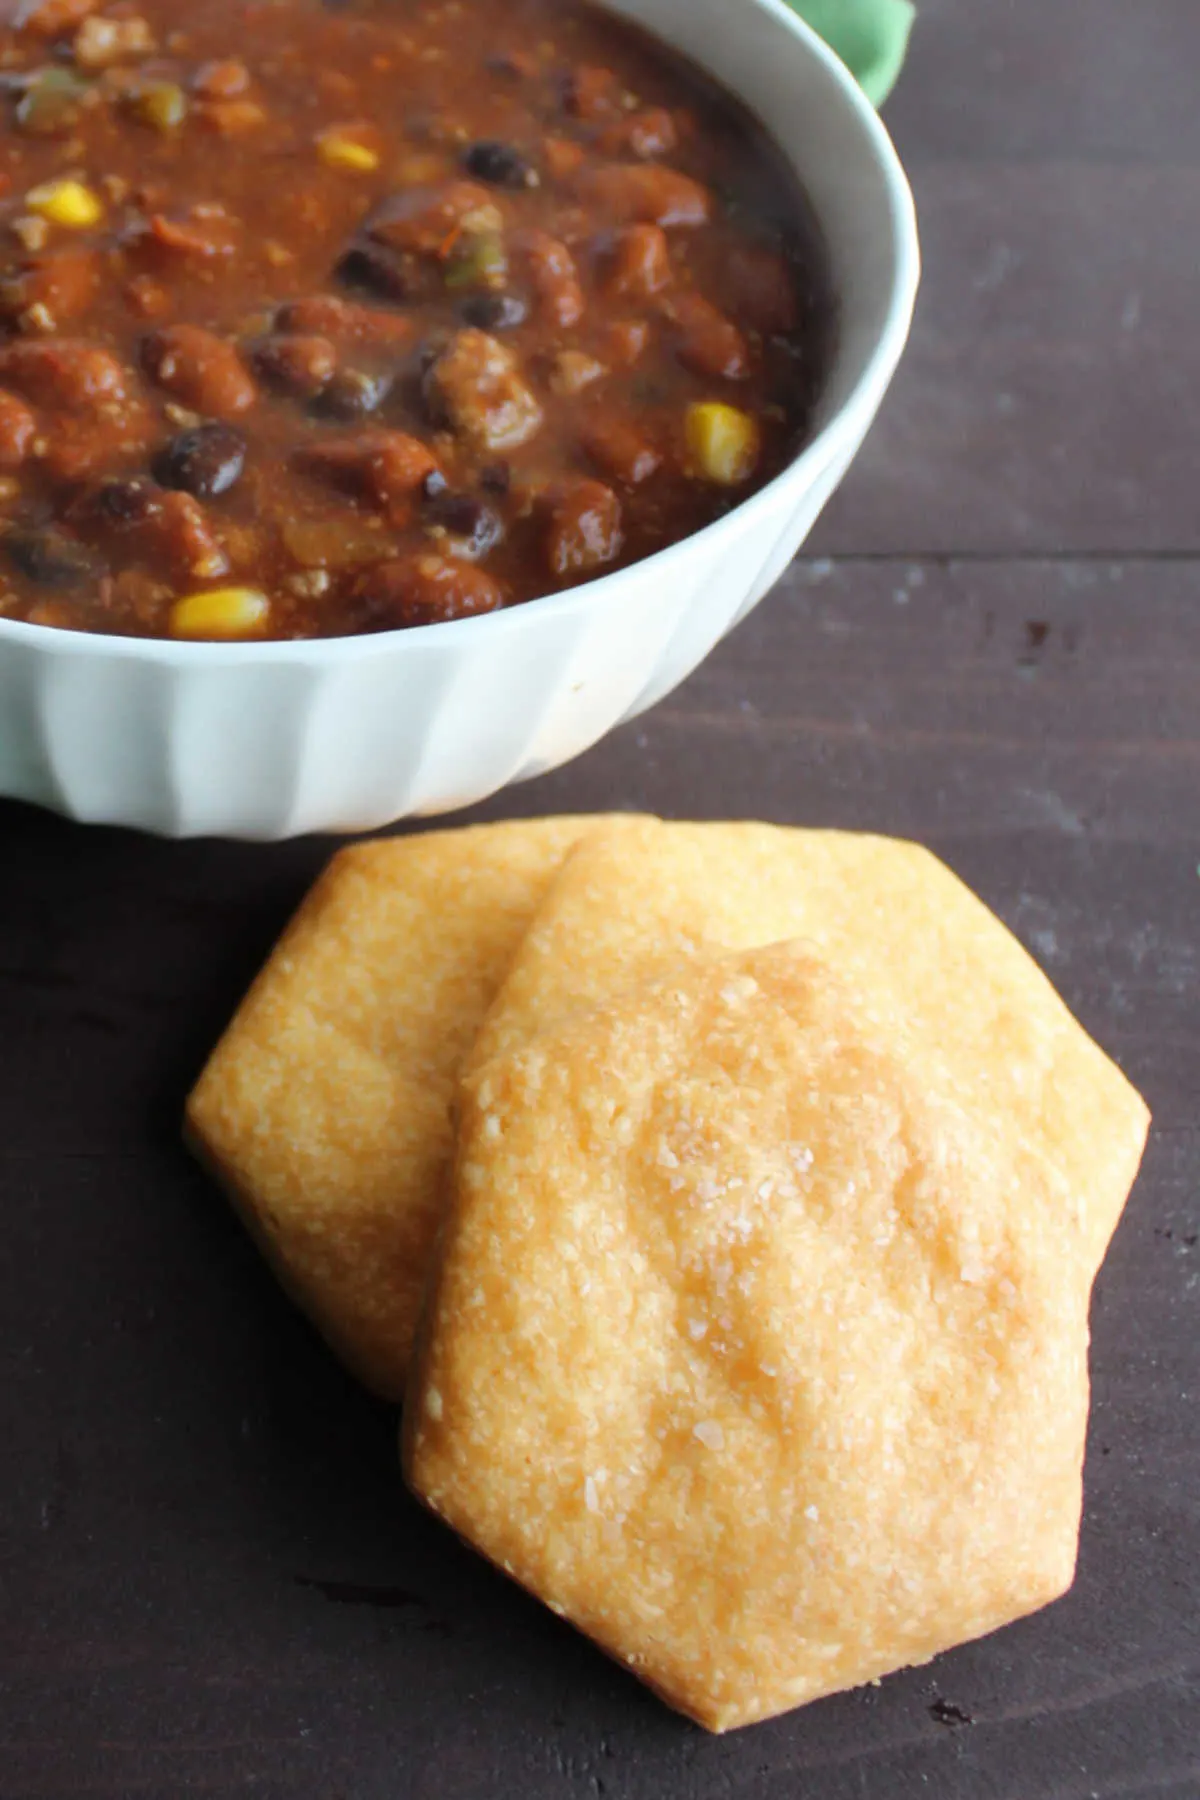 large homemade cheese crackers next to bowl of chili.